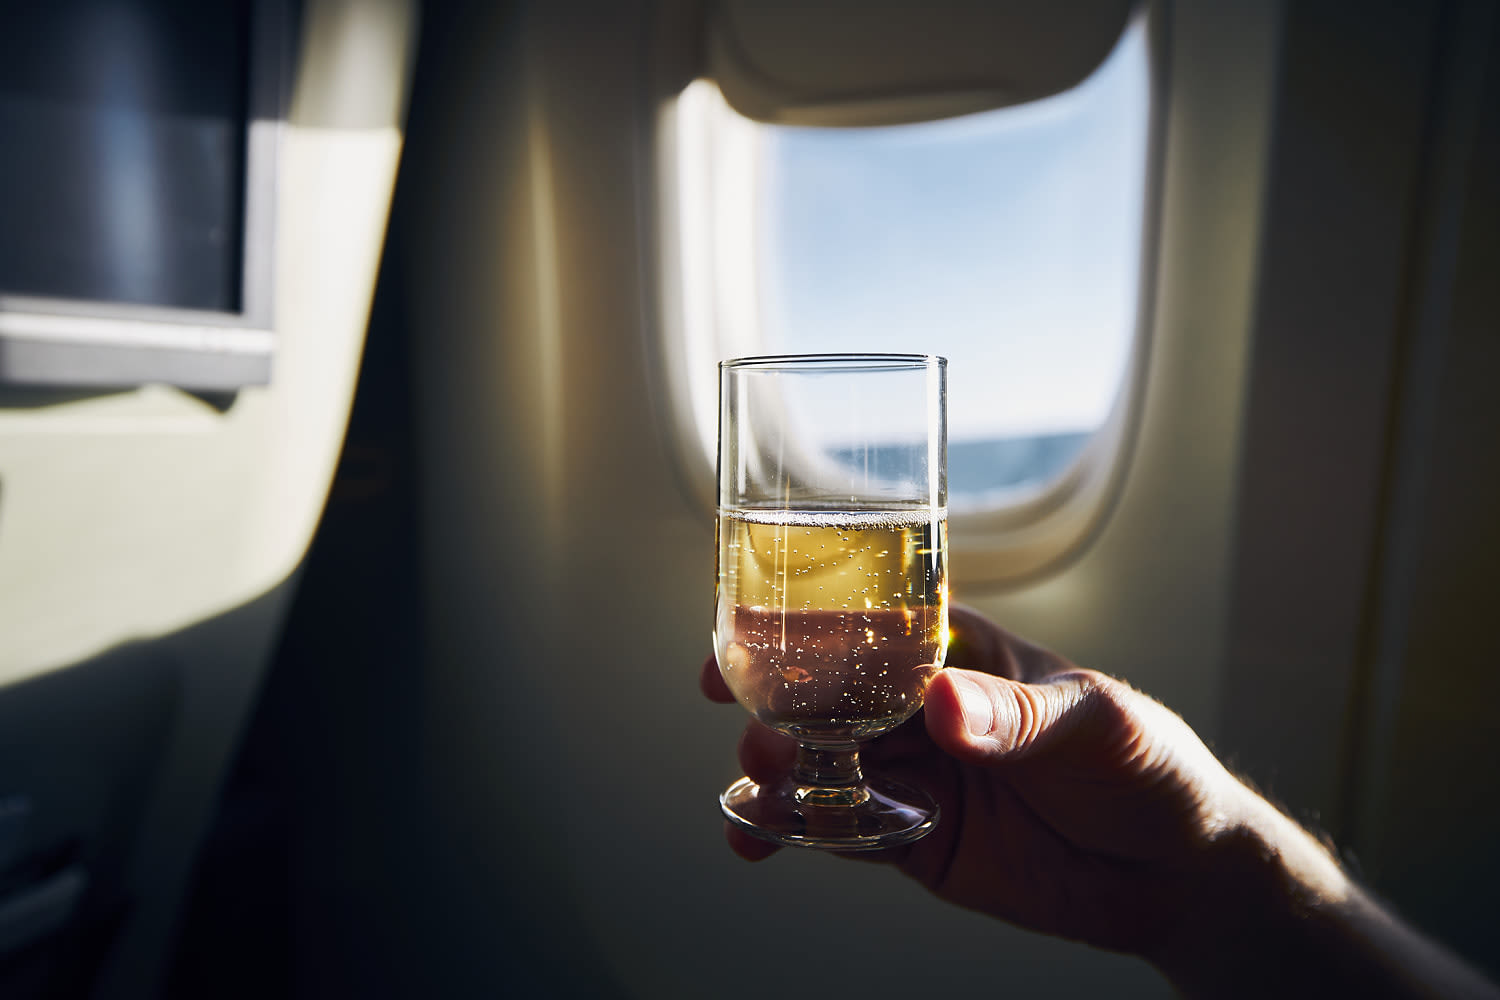 Why you shouldn't drink before dozing off on long-haul plane flights